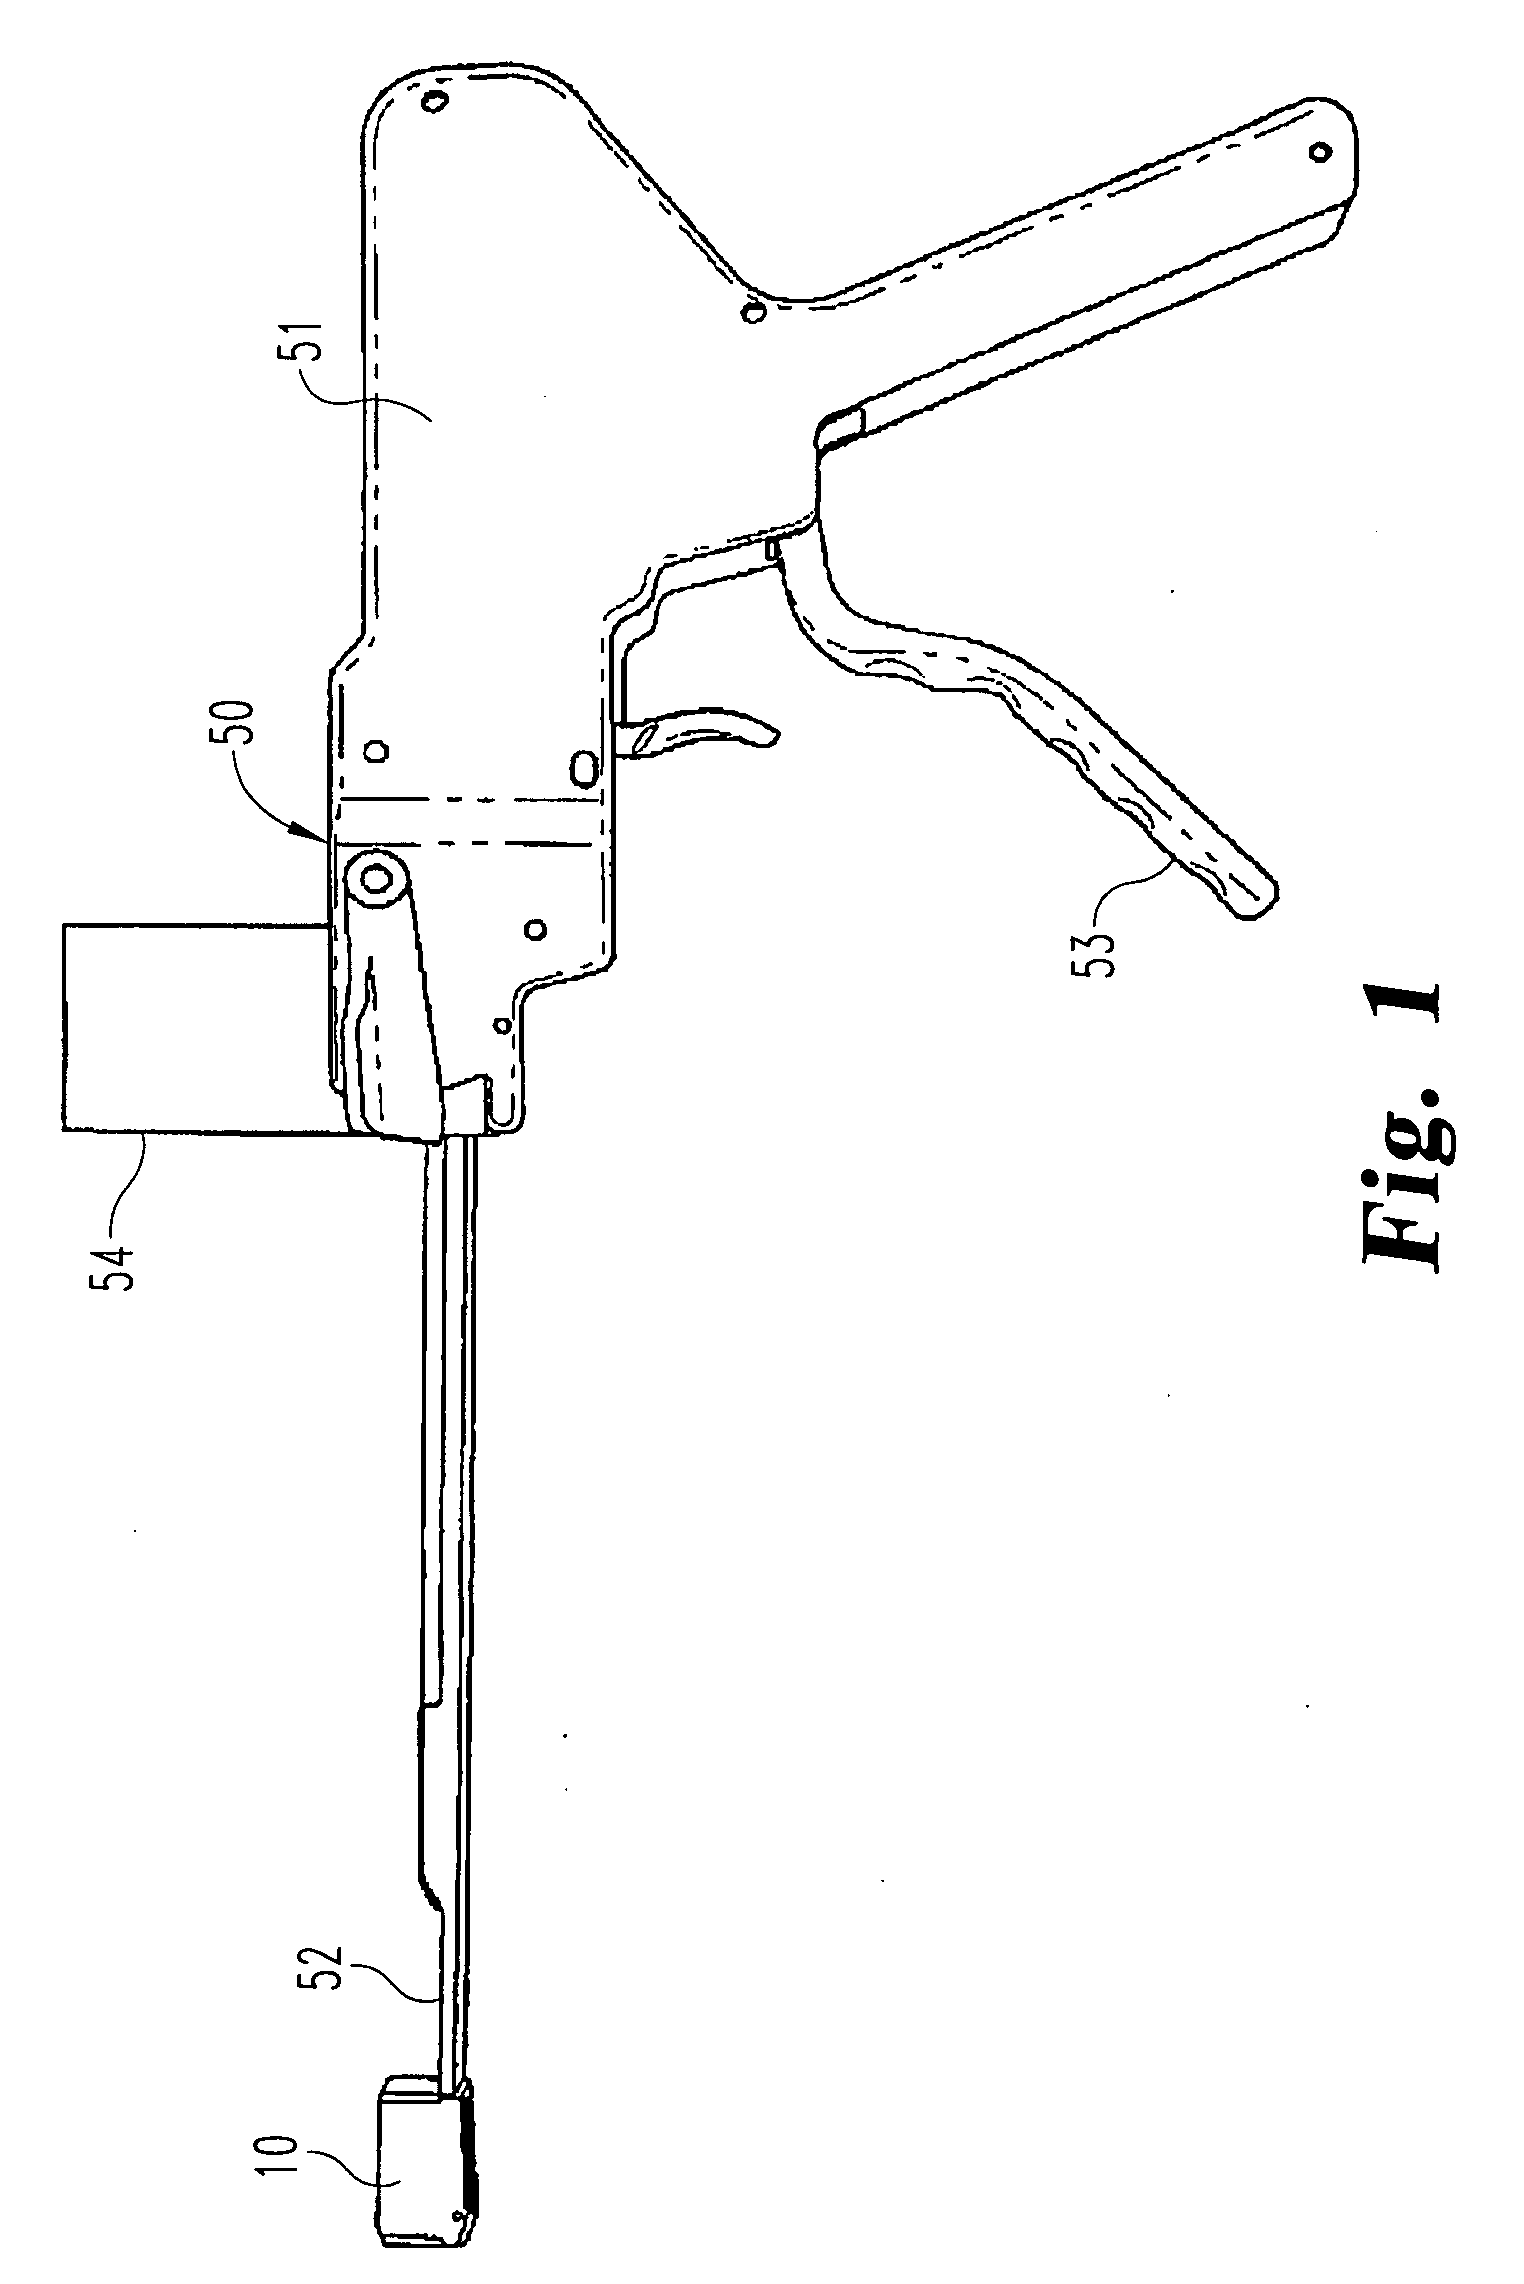 Expandable Interbody Fusion Device